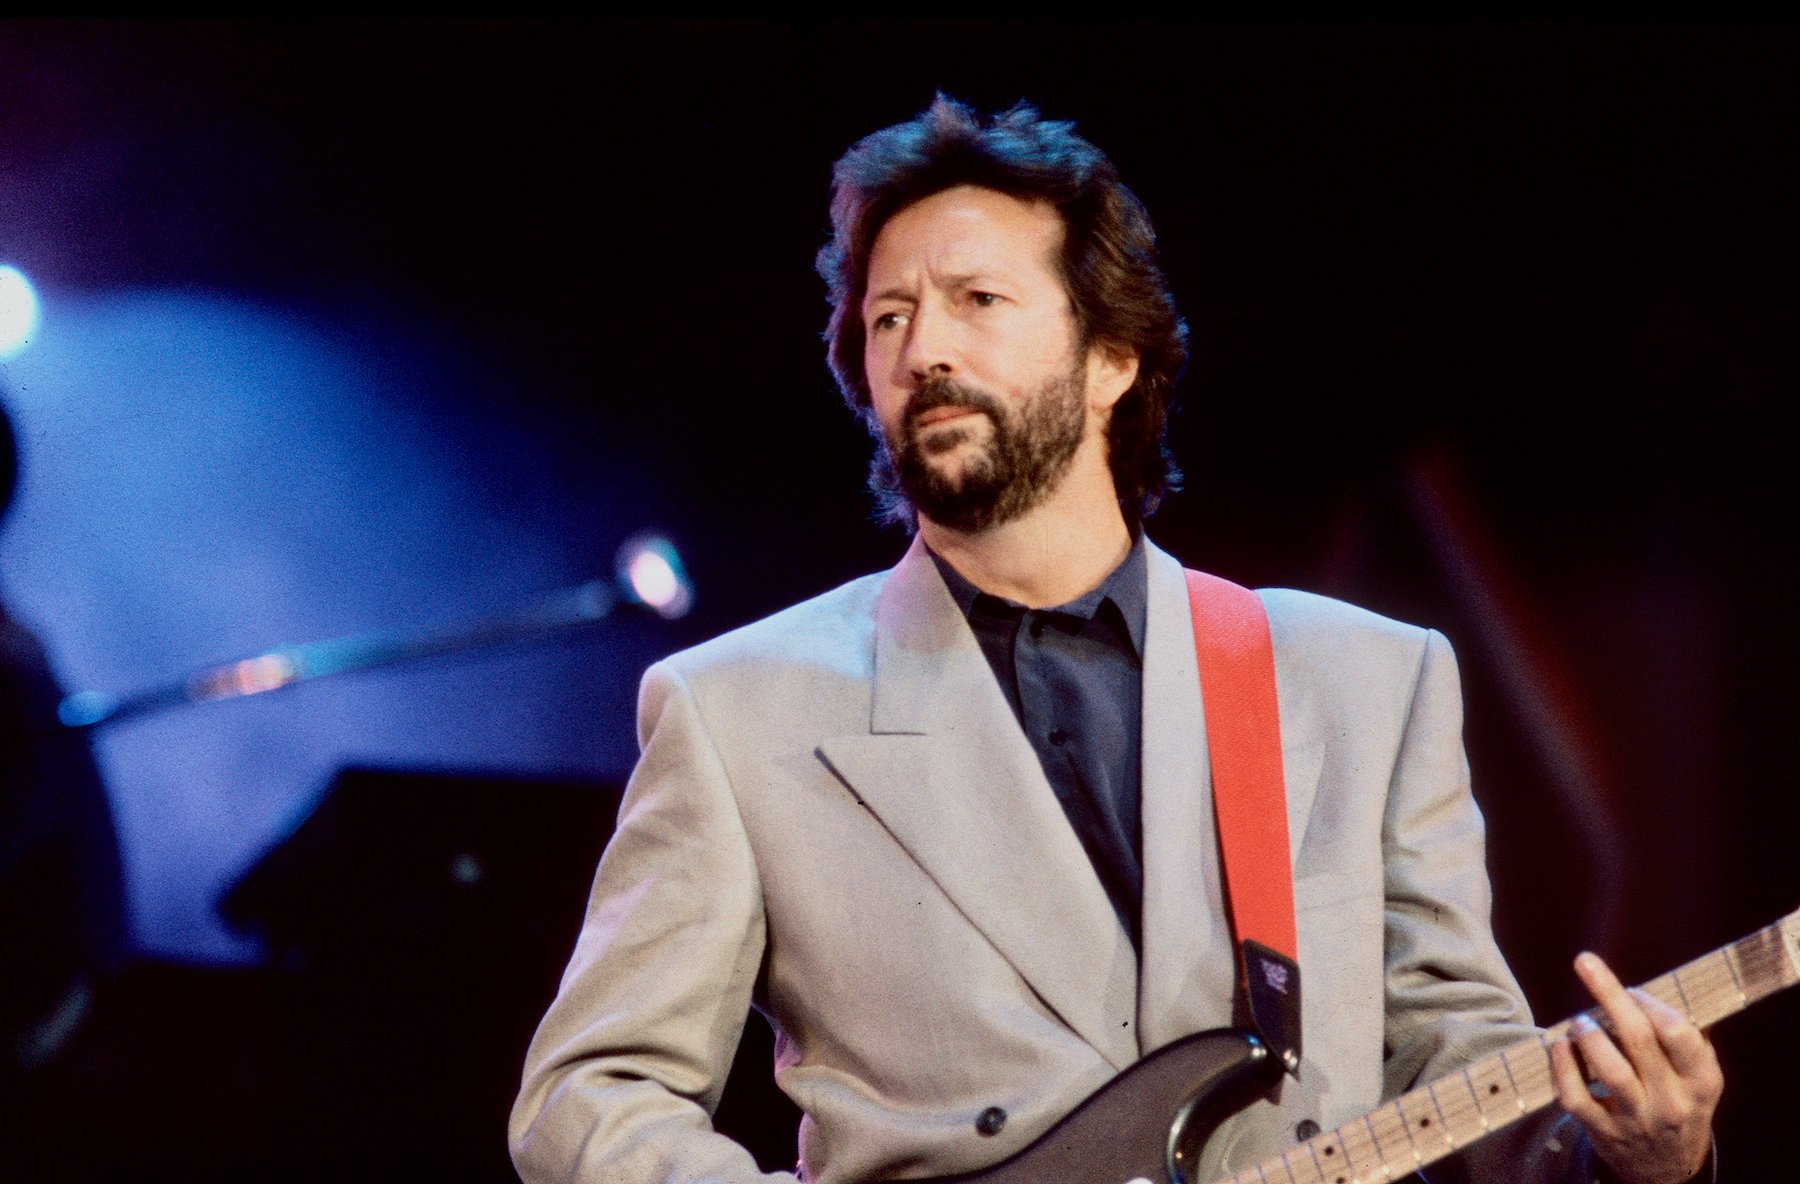 Eric Clapton's Fans Have 3 Theories About His Nickname, Slow Hand